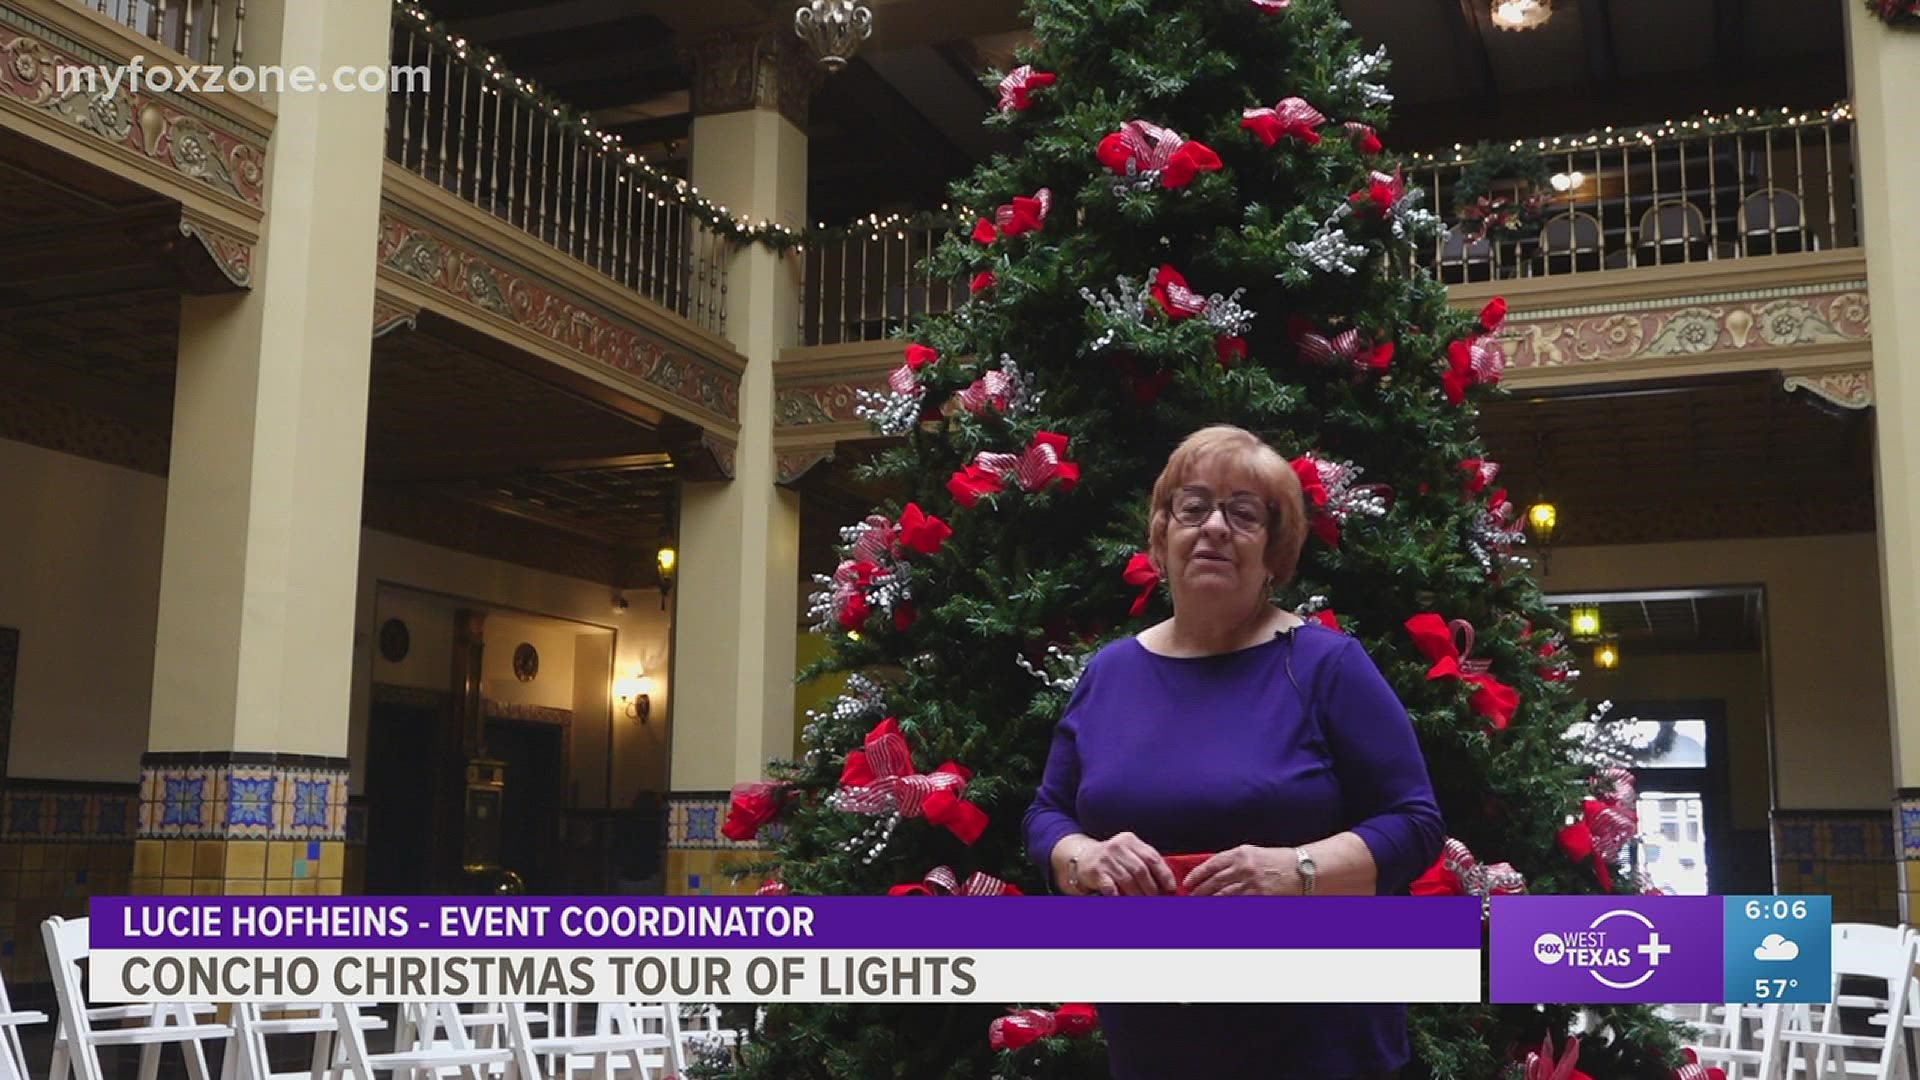 Concho Christmas tour of lights set to begin the first weekend of December.